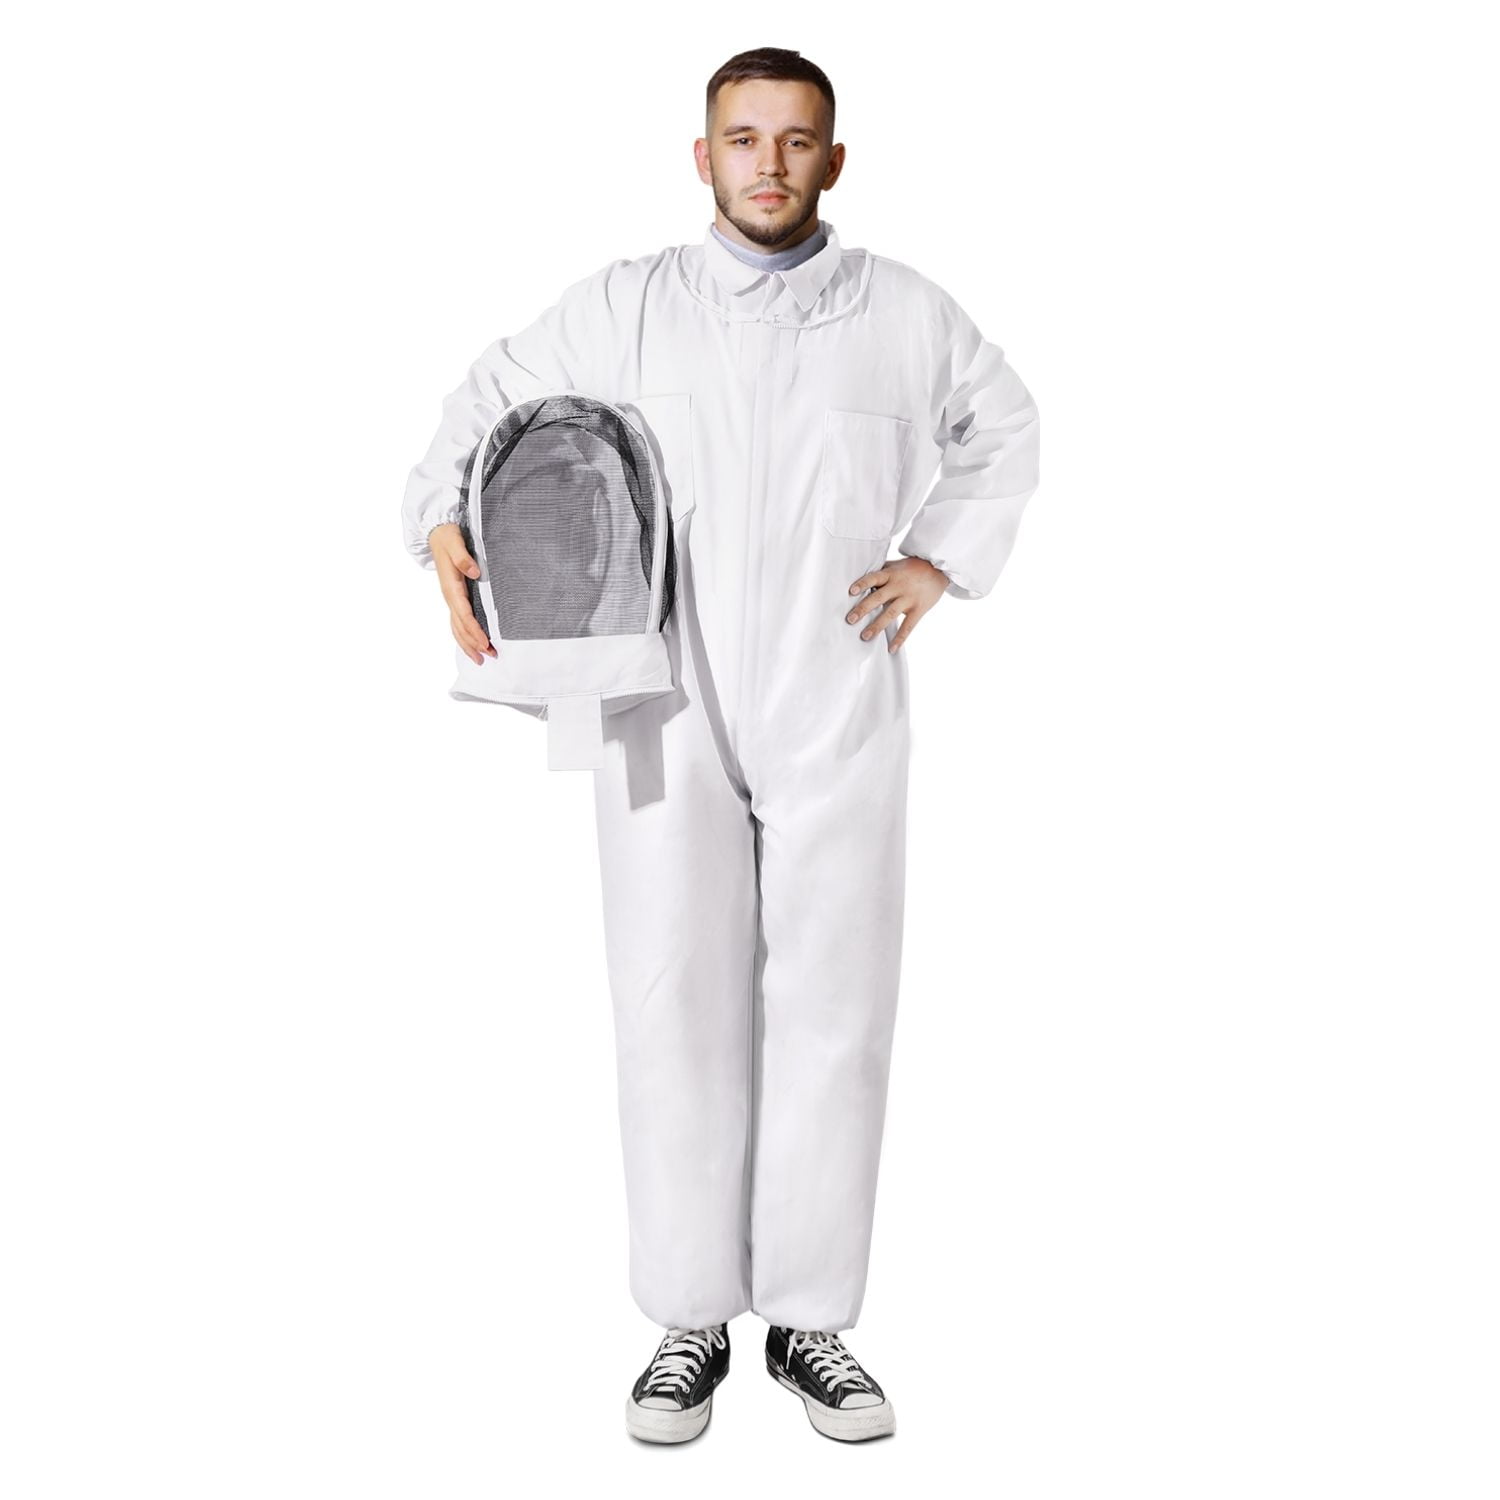 Bee Keeping Suit Adult  Bee Keeper Suit with Round Hood ZSTR-2XLarge 